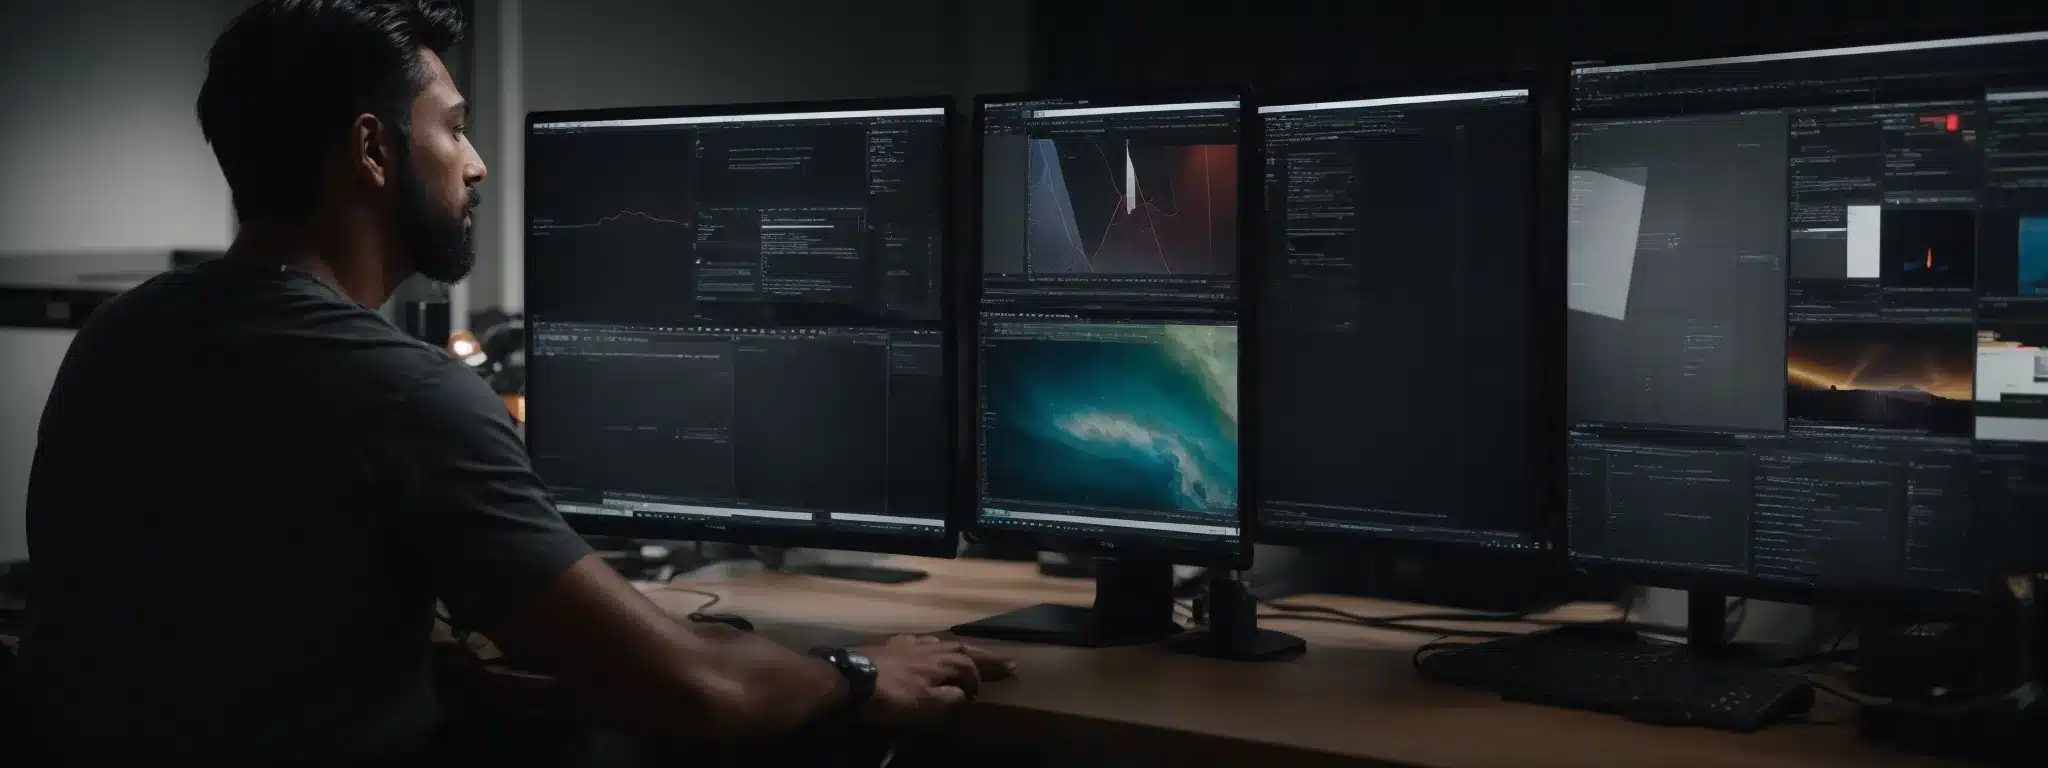 A Web Developer Sits In Front Of A Multi-Monitor Setup, Adjusting A Slider On A Website That Gracefully Adapts To Different Screens Displayed On Each Monitor.